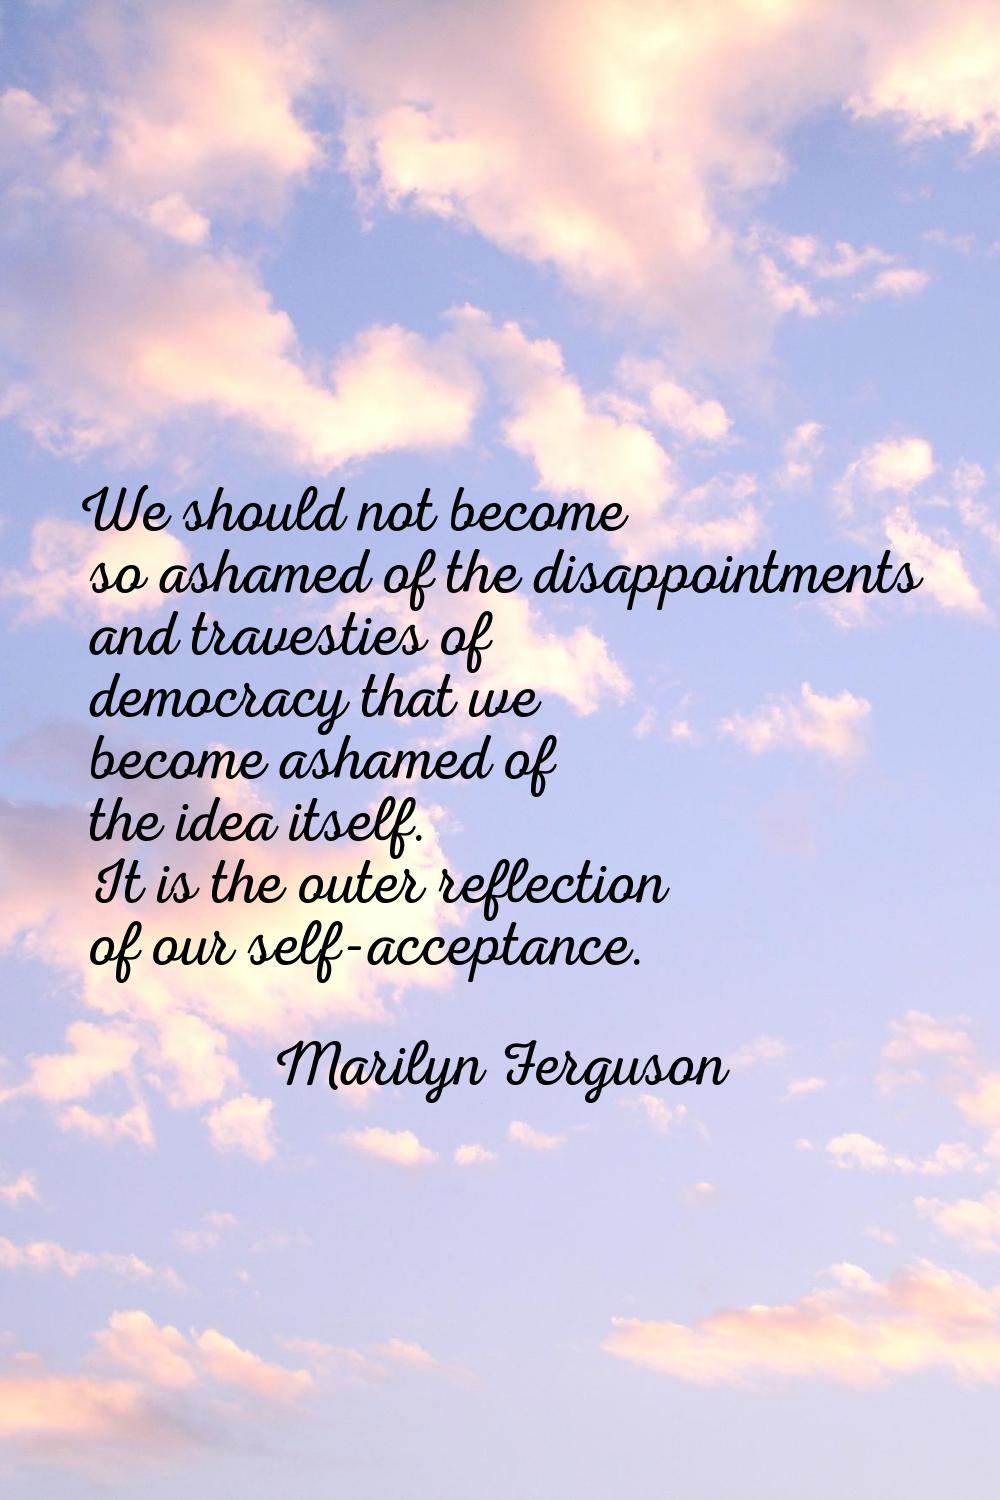 We should not become so ashamed of the disappointments and travesties of democracy that we become a